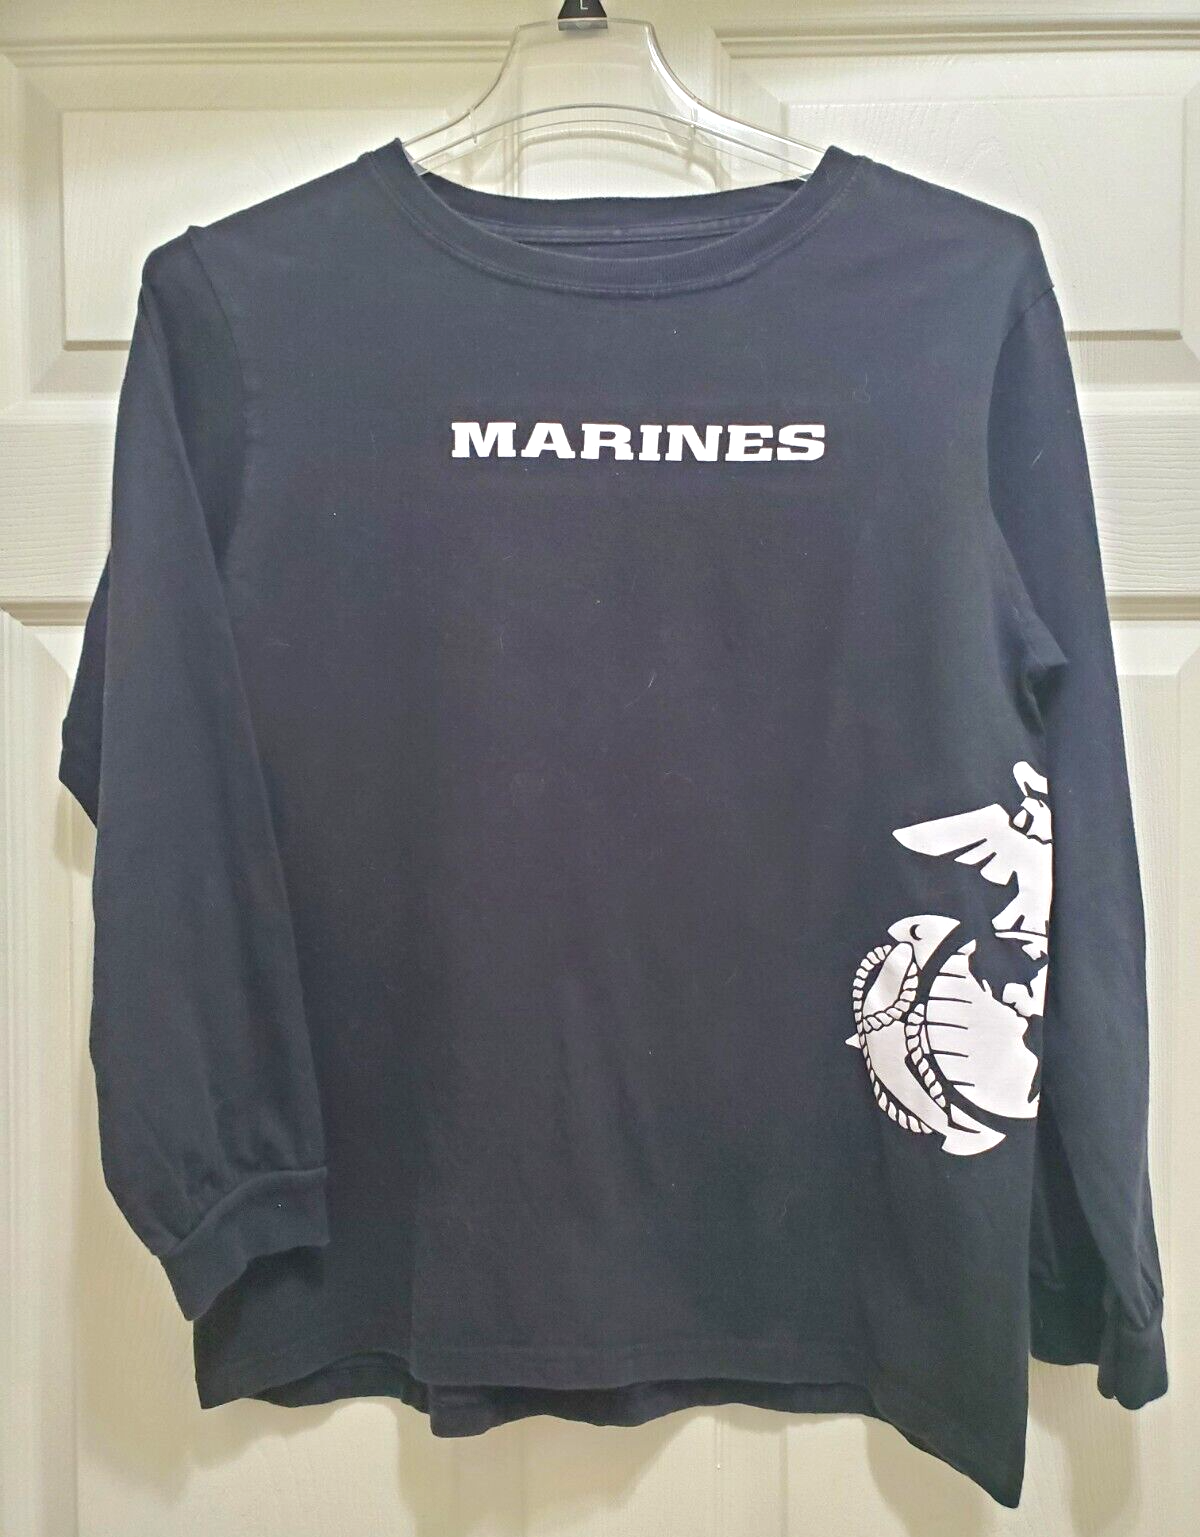 Primary image for Marines USMC US Marine Corps "Earned Never Given" Men's T-Shirt Size M Black